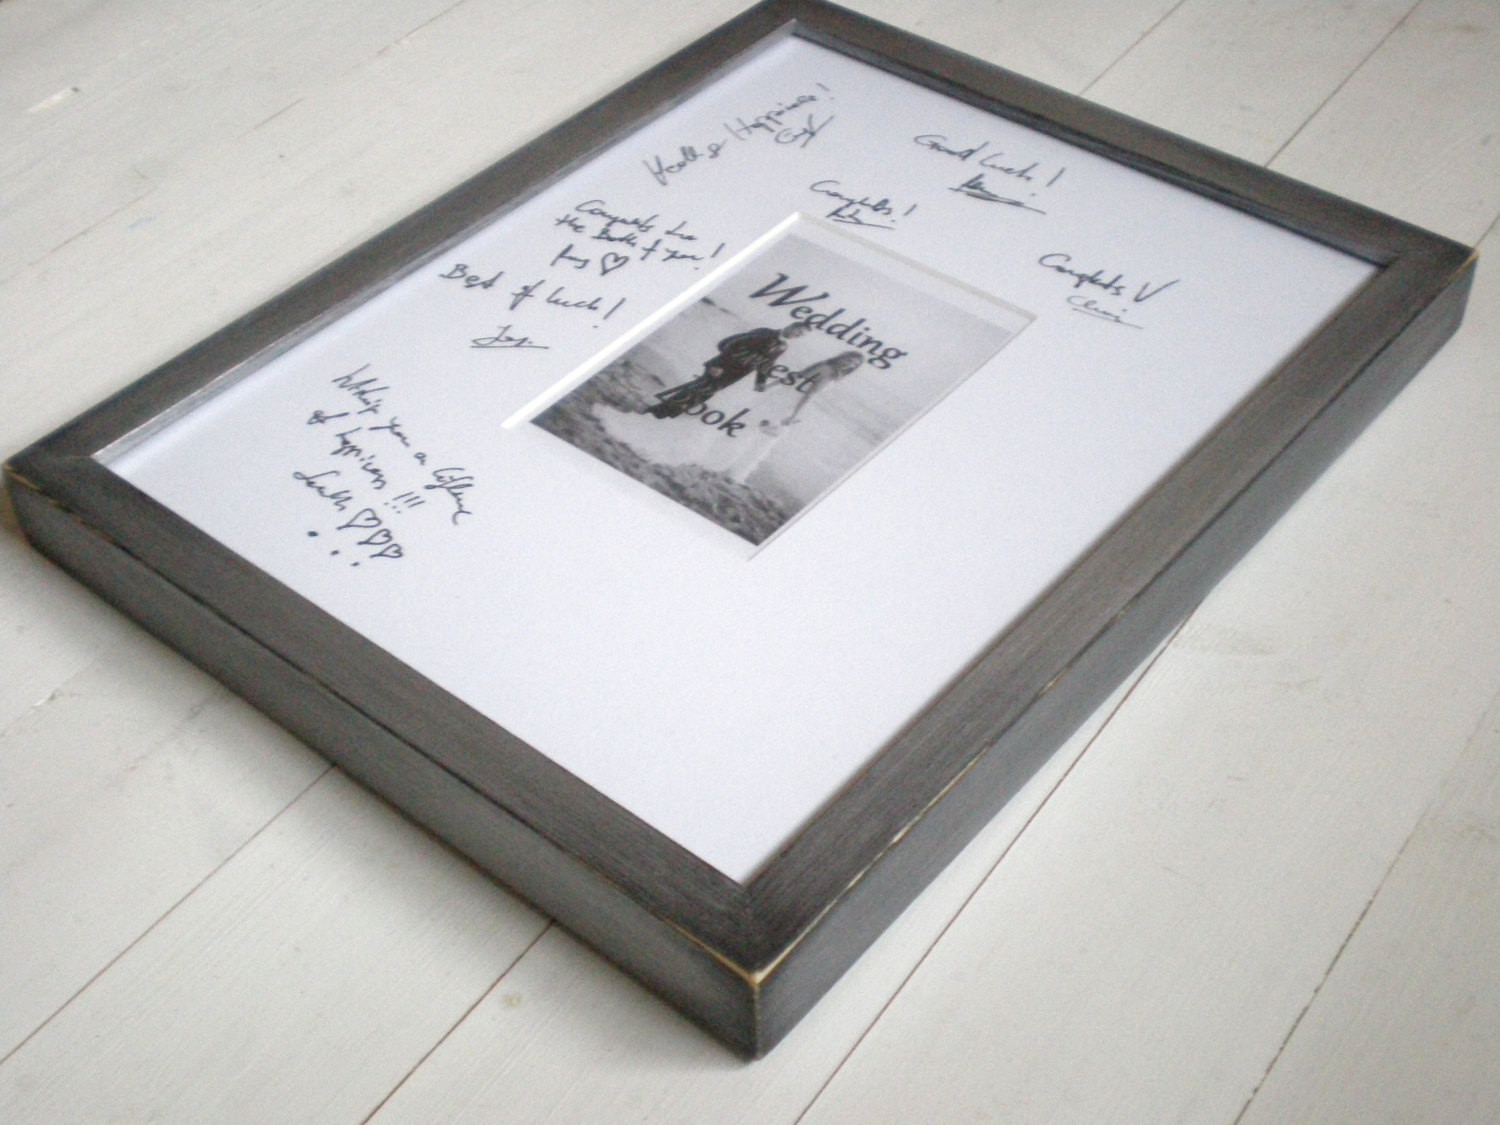 Wedding Guest Book Frame
 Like this item